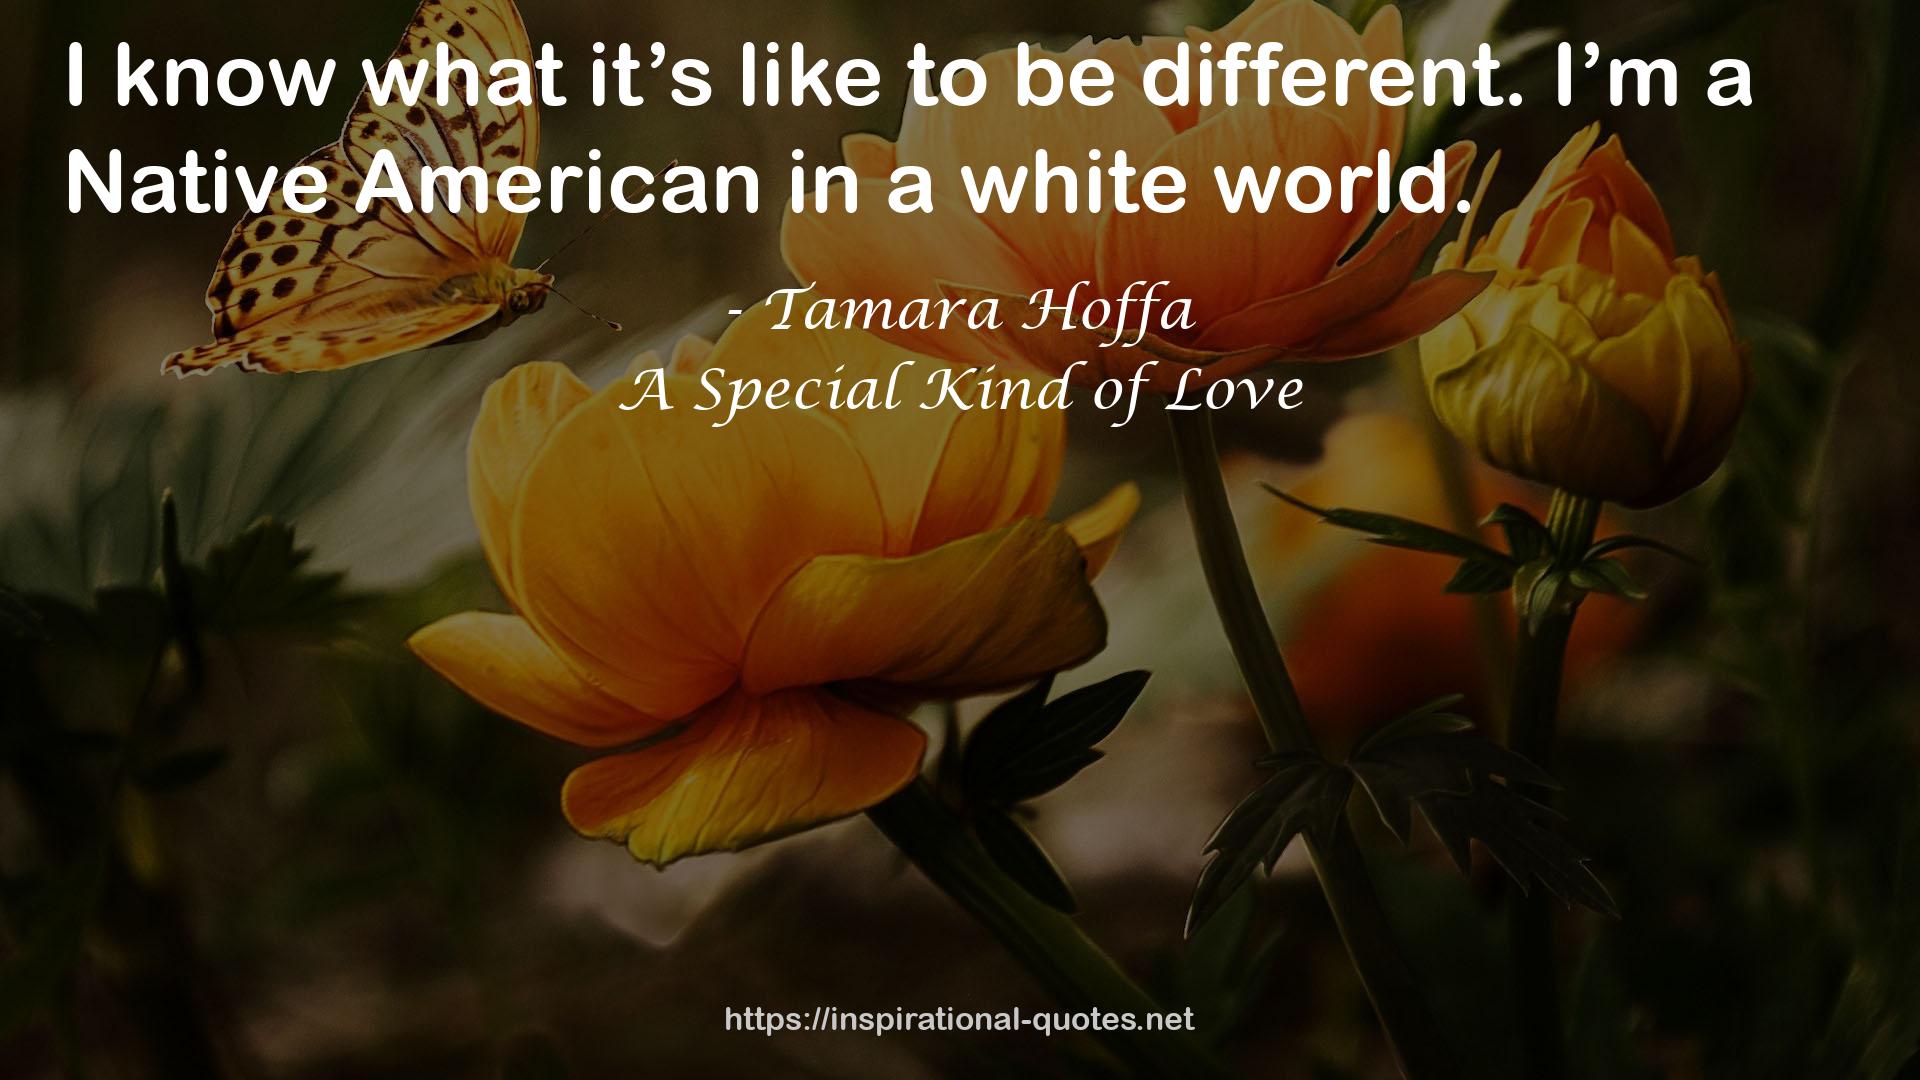 A Special Kind of Love QUOTES